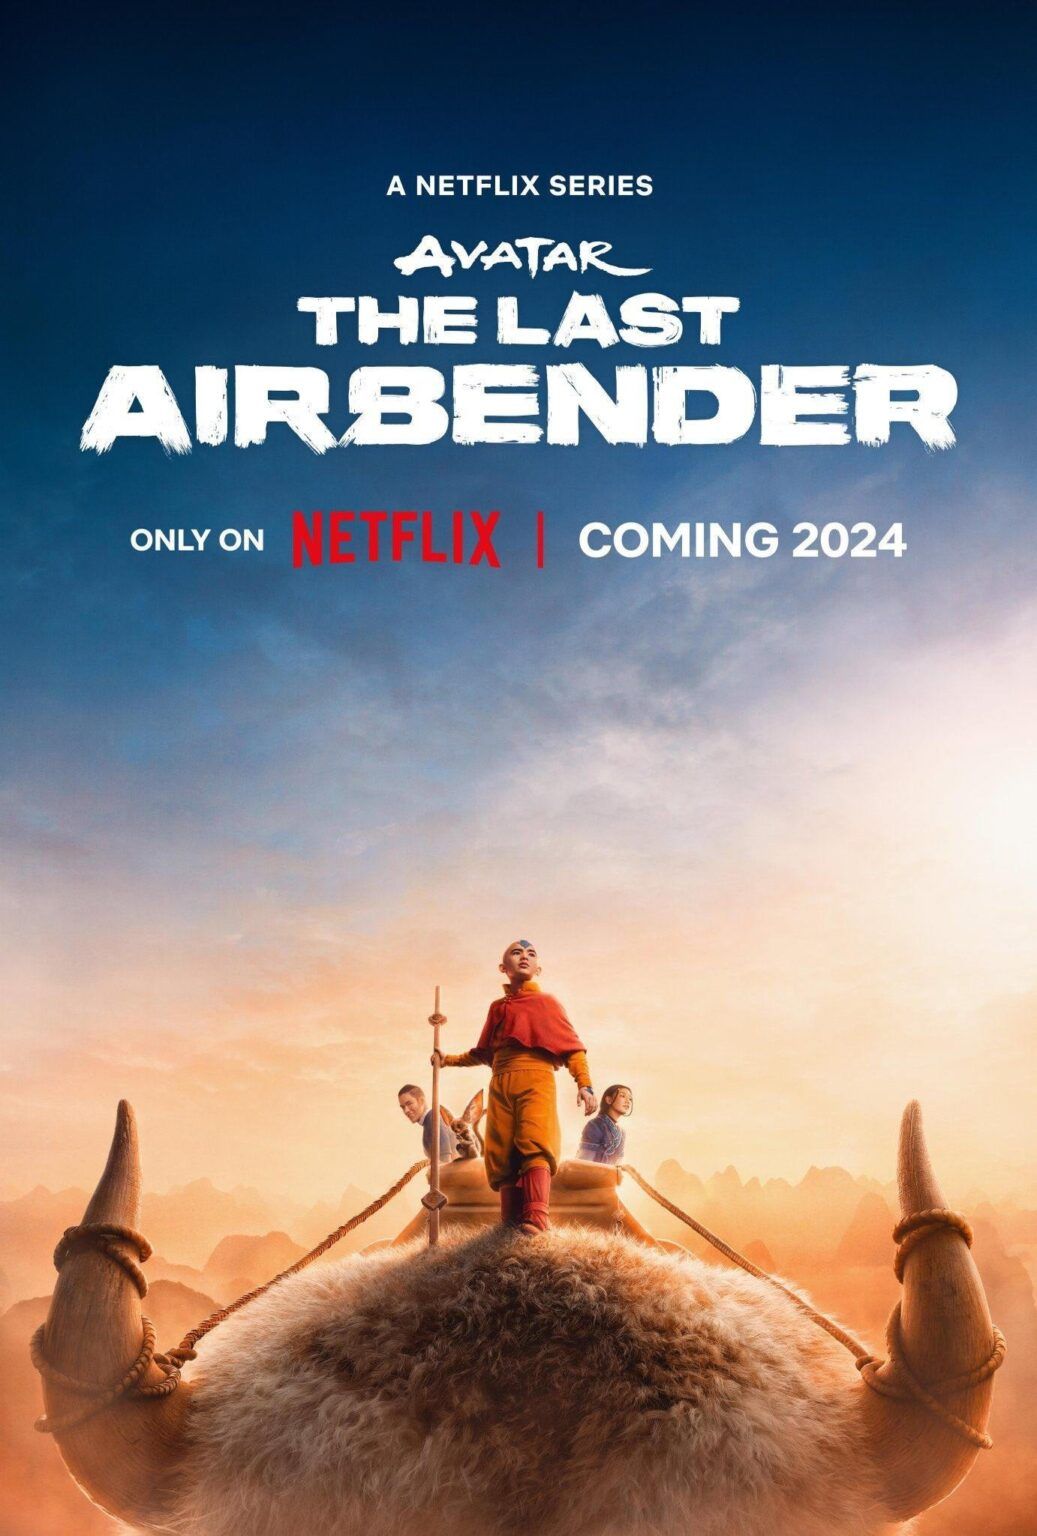 Avatar The Last Airbender Trailer Gives a Detailed Look at the Live